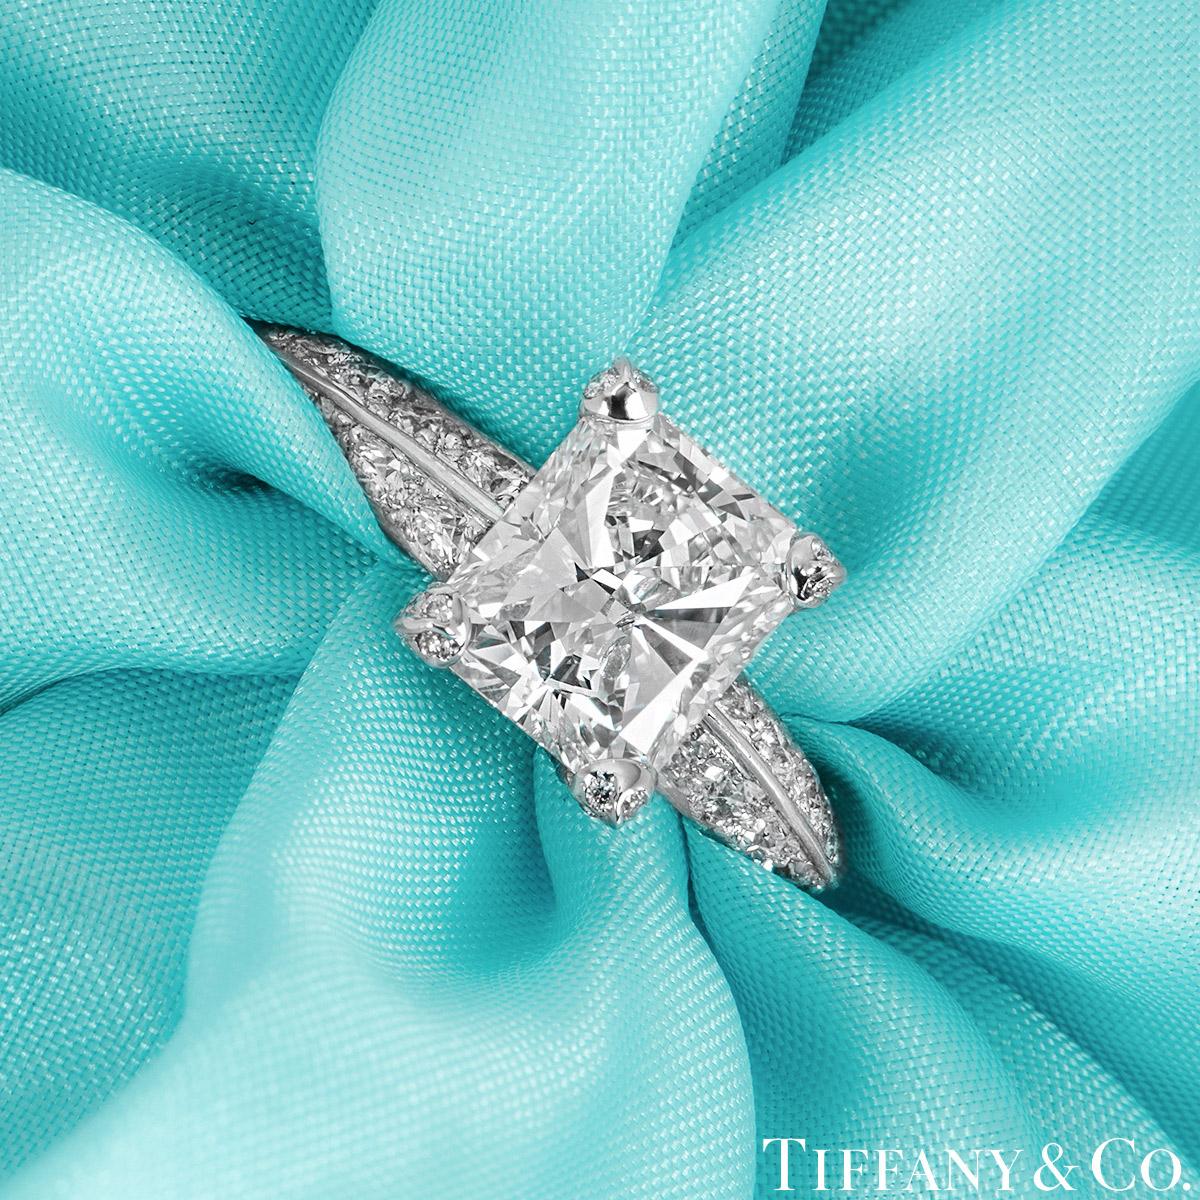 A stunning platinum diamond engagement ring by Tiffany & Co. The ring is set to the centre with a radiant cut diamond in an exquisite four claw mounting, weighing 2.01ct, G colour and IF (internally flawless) clarity. The knife edge engagement ring